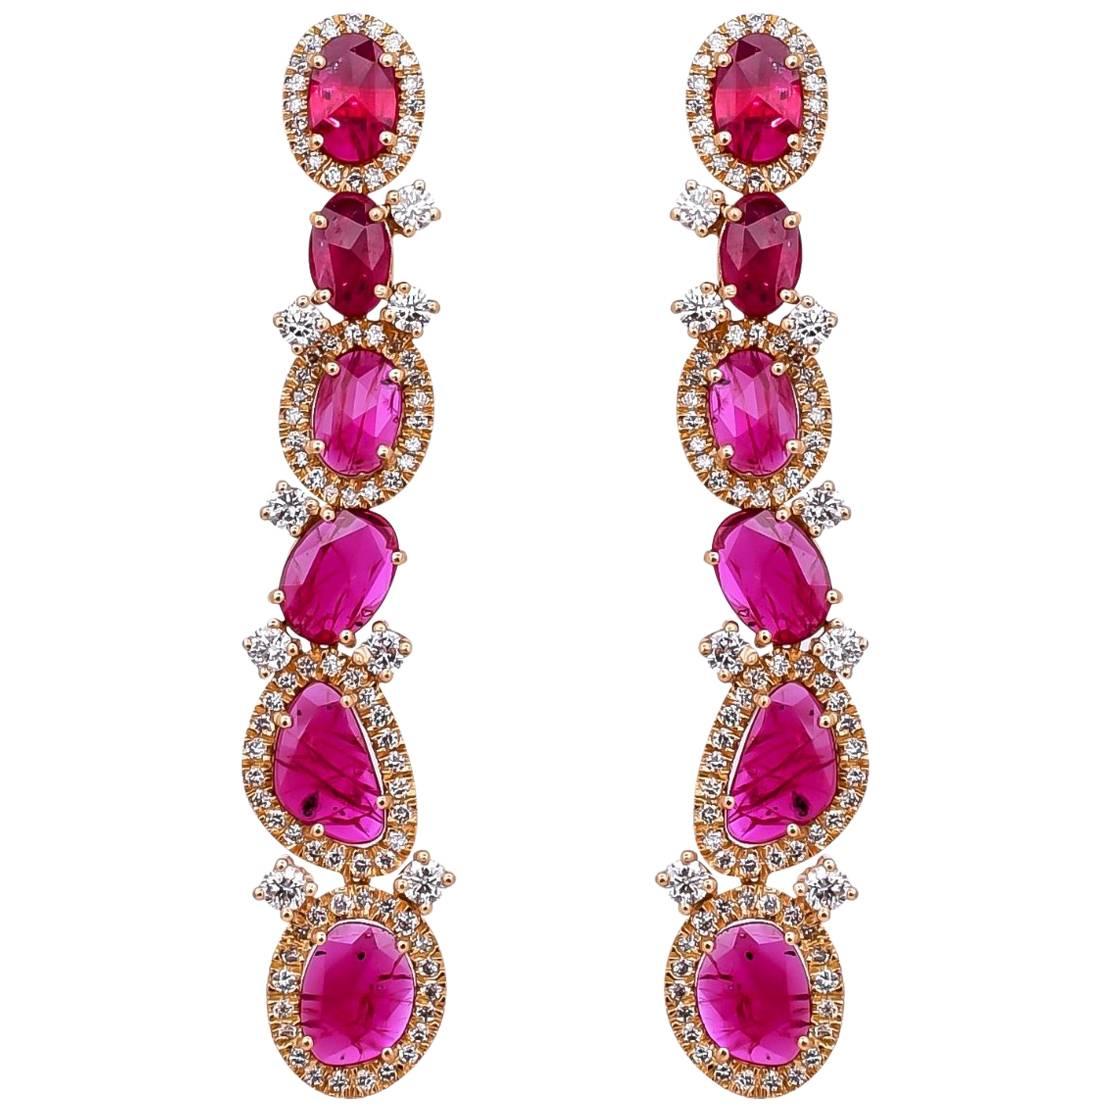 6.38 Carat Mozambique Ruby and Diamond Dangle Earrings